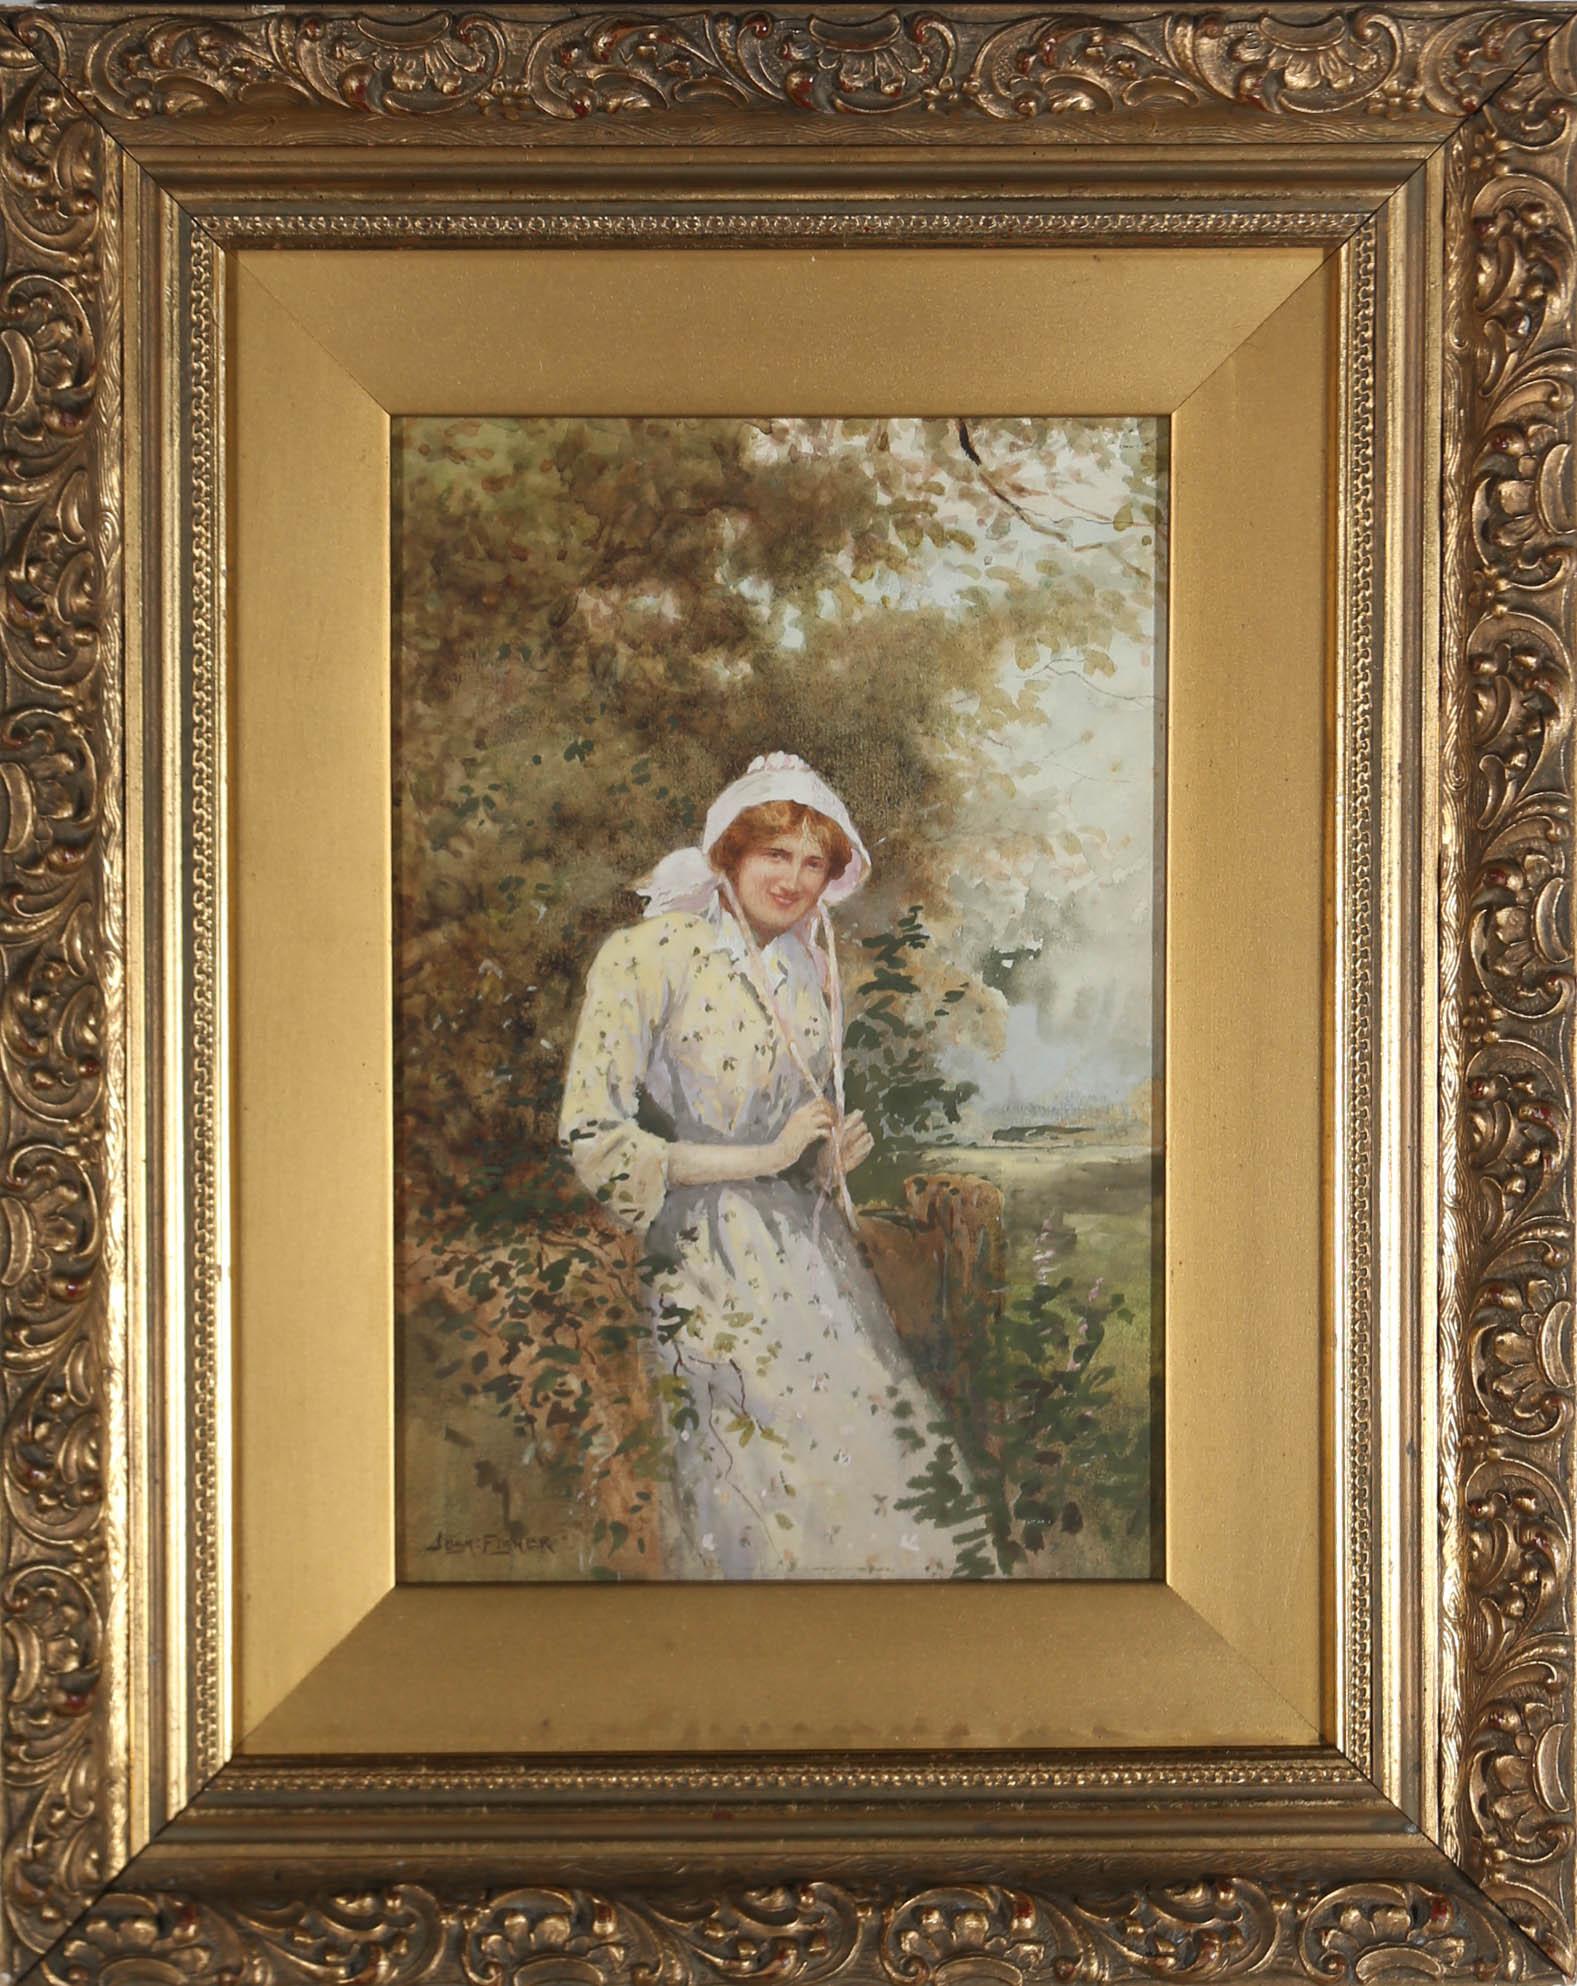 A charming scene depicting a woman seated on a wooden fence in the summer garden. Signed to the lower right. Presented in a gilt frame with acanthus details . On paper.